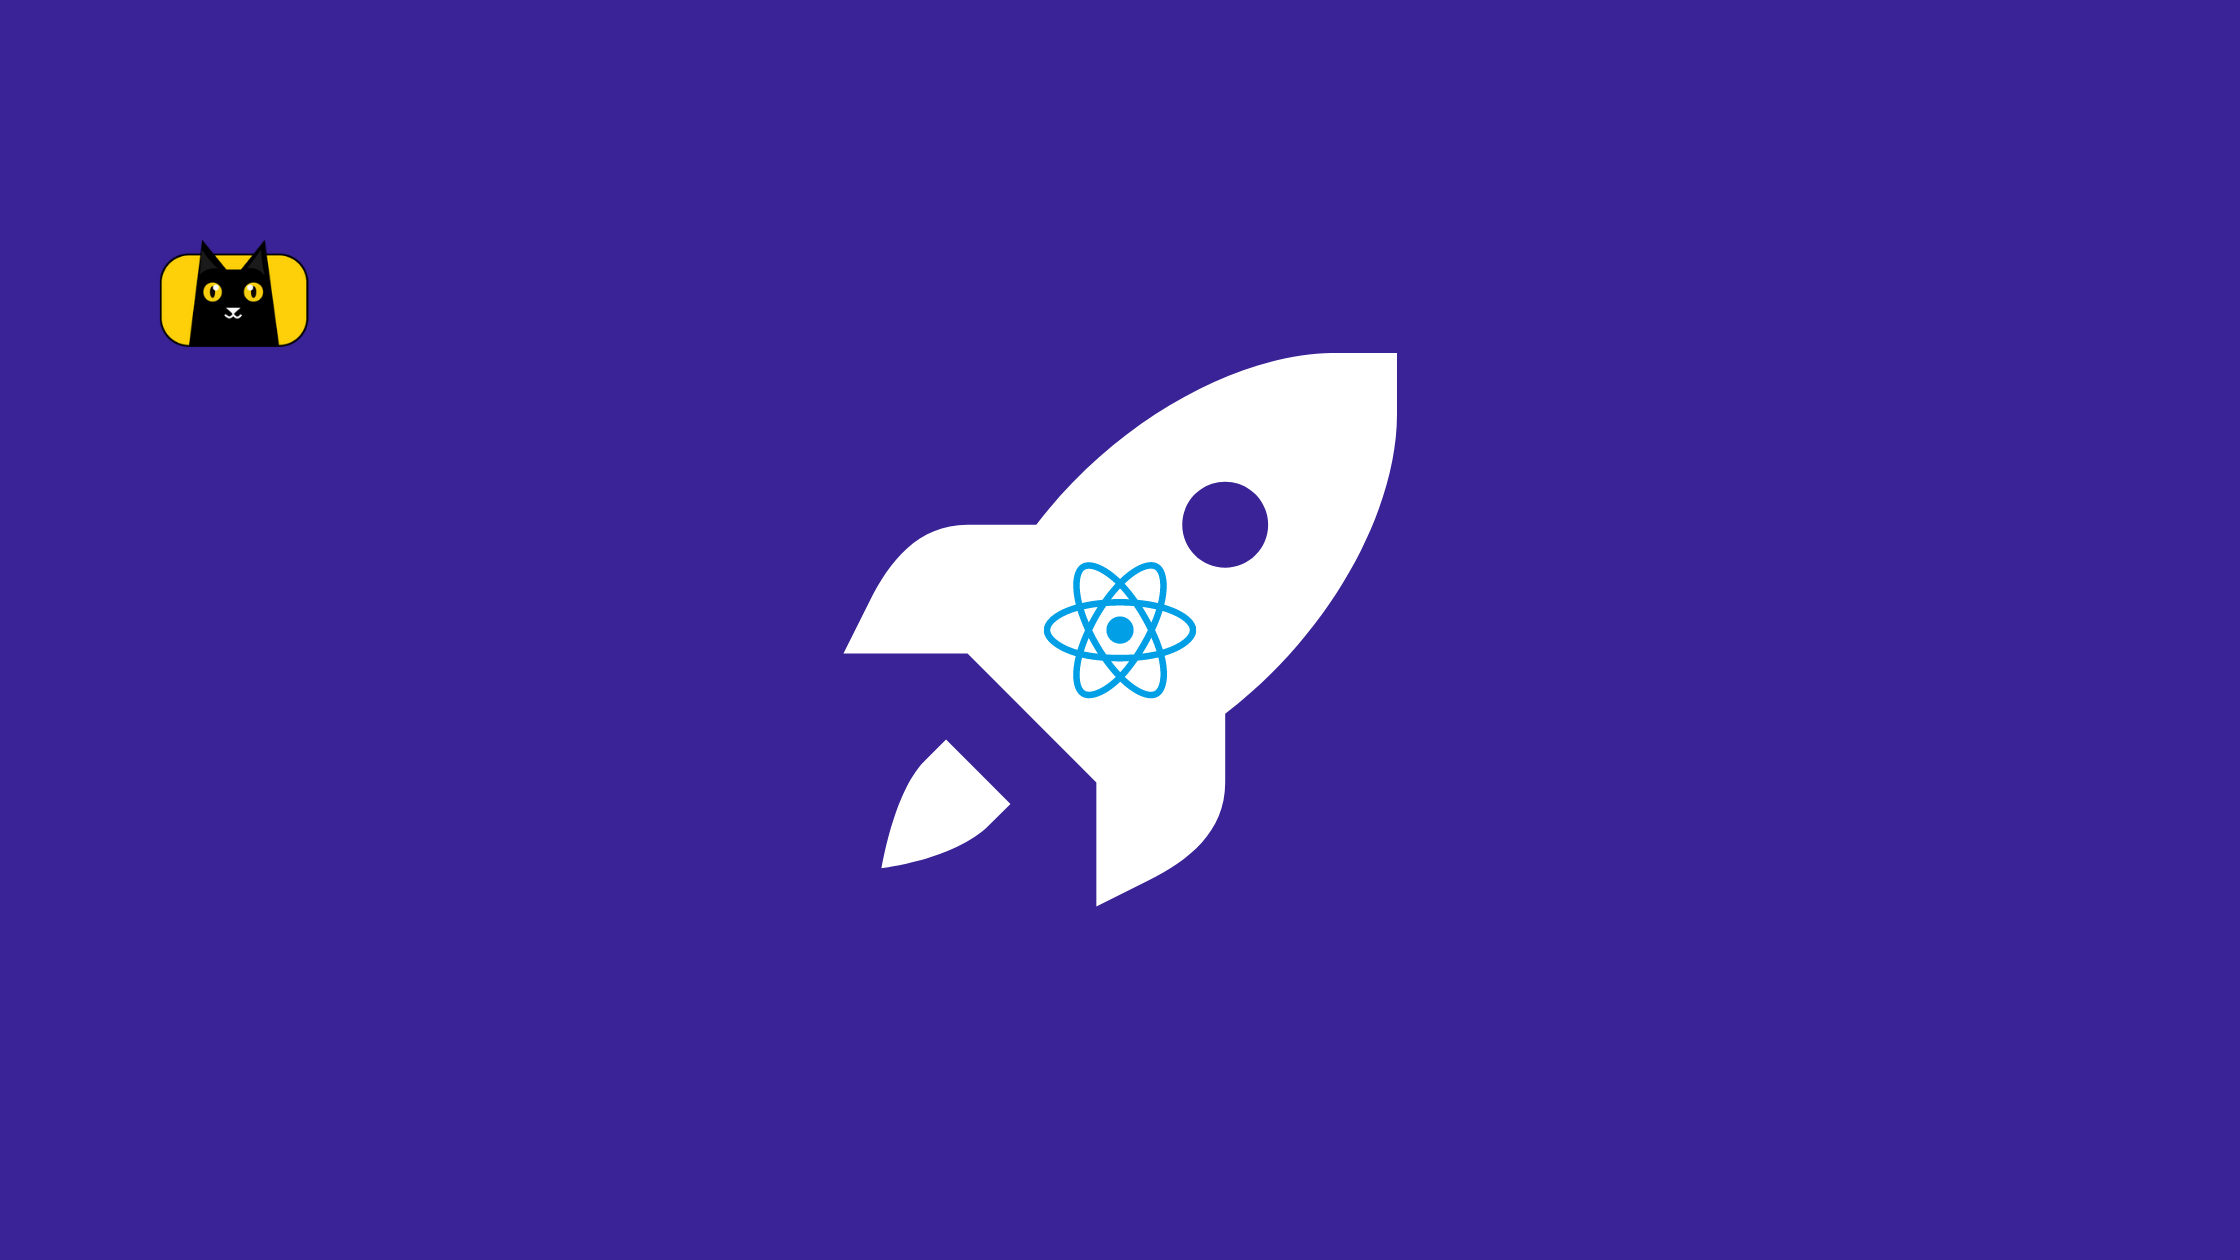 A picture of a rocket, a React logo, and a CopyCat logo.